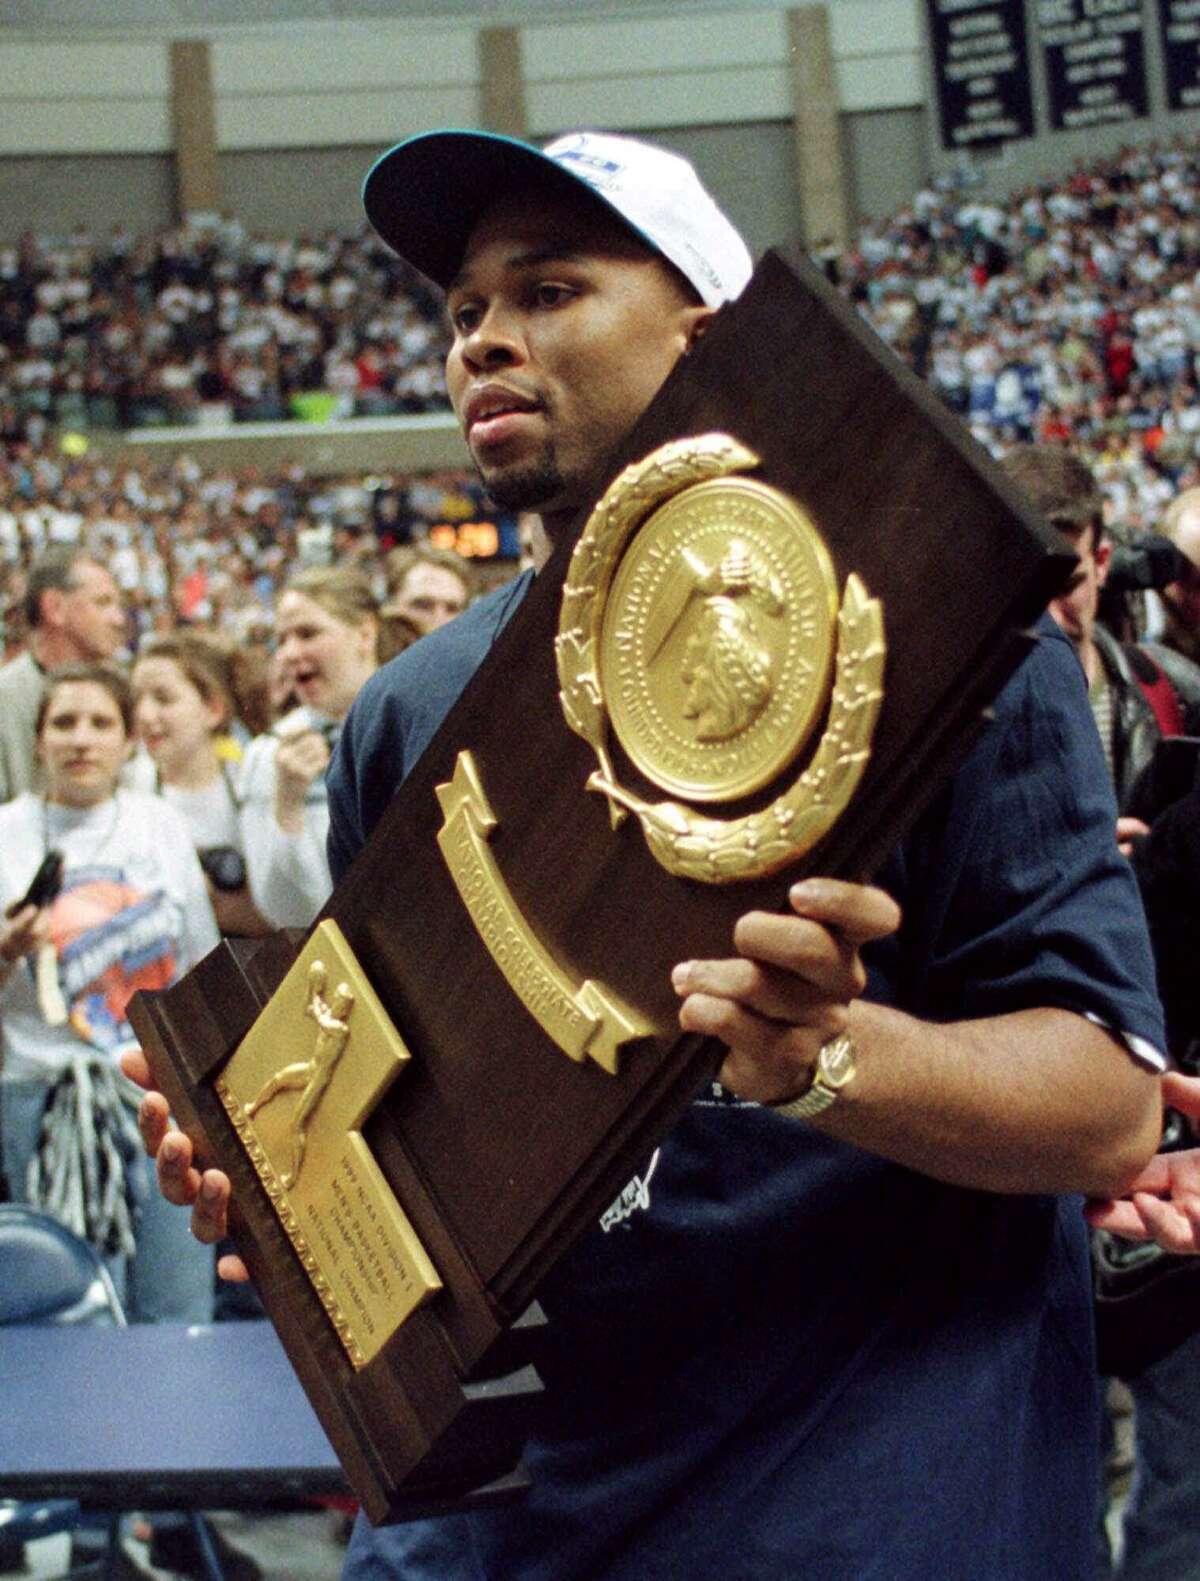 Connecticut basketball team co-captain Ricky Moore carries the winner's trophy during a rally for the team on the UConn campus in Storrs, Conn. Tuesday, March 30, 1999. The UConn men's team defeated Duke 77-74 to win the NCAA Division I men's basketball championship Monday, March 29, 1999. (AP Photo/Carla Cataldi)